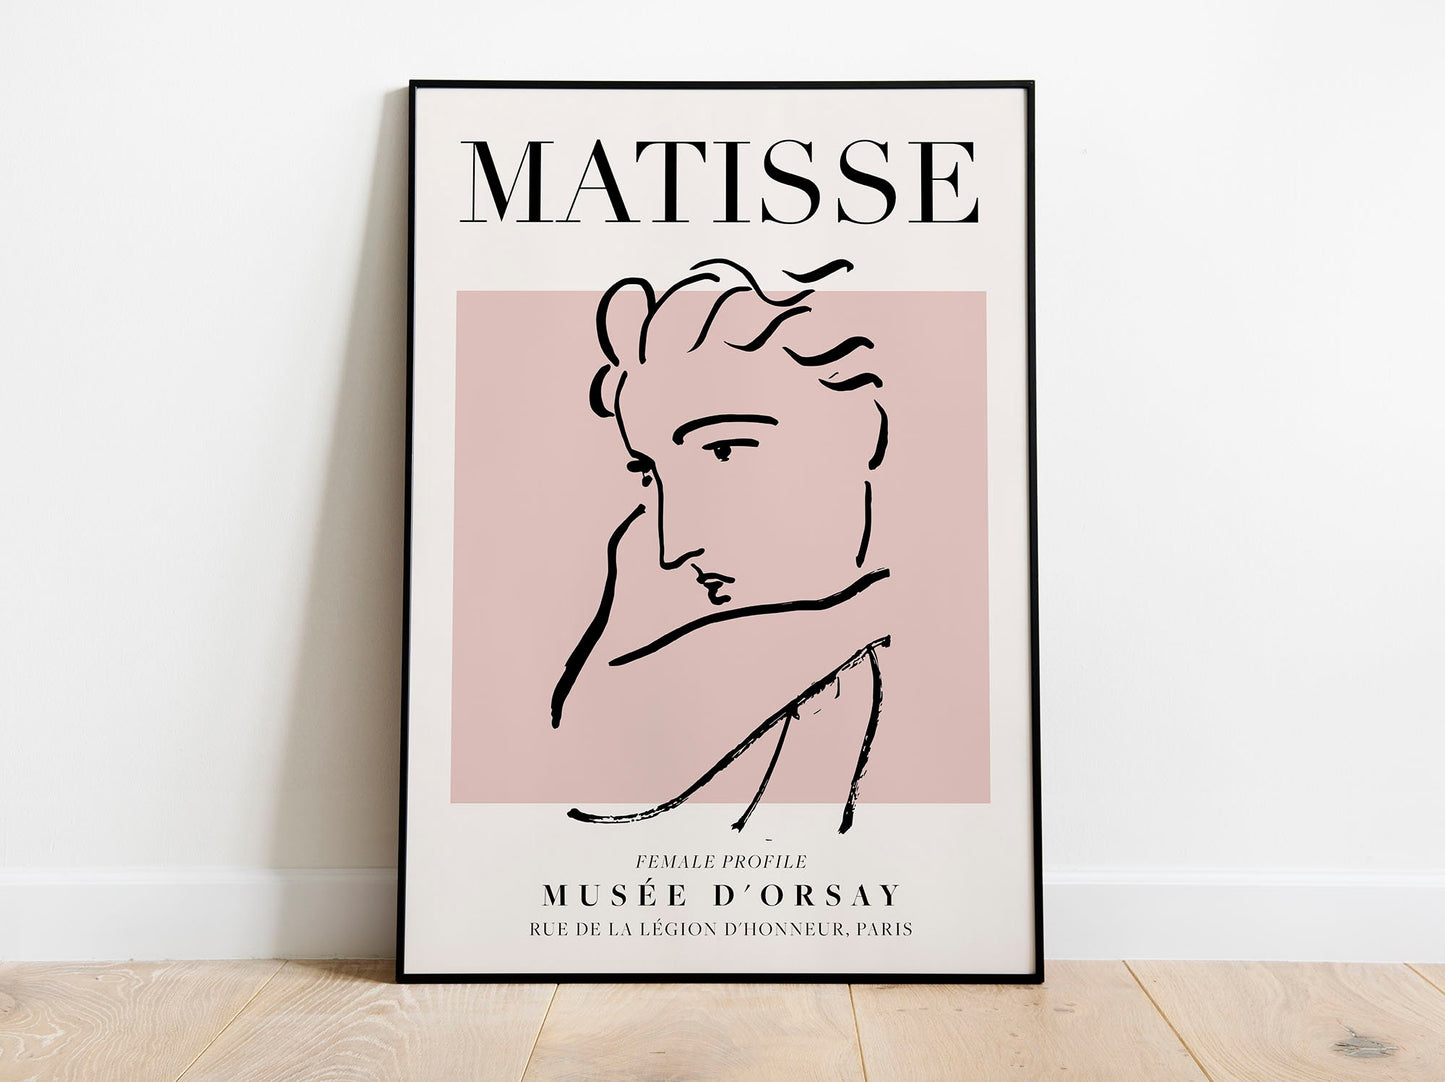 Henri Matisse - Female Profile, Exhibition Vintage Line Art Poster, Minimalist Line Drawing Wall Art, Ideal Home Decor or Gift Print